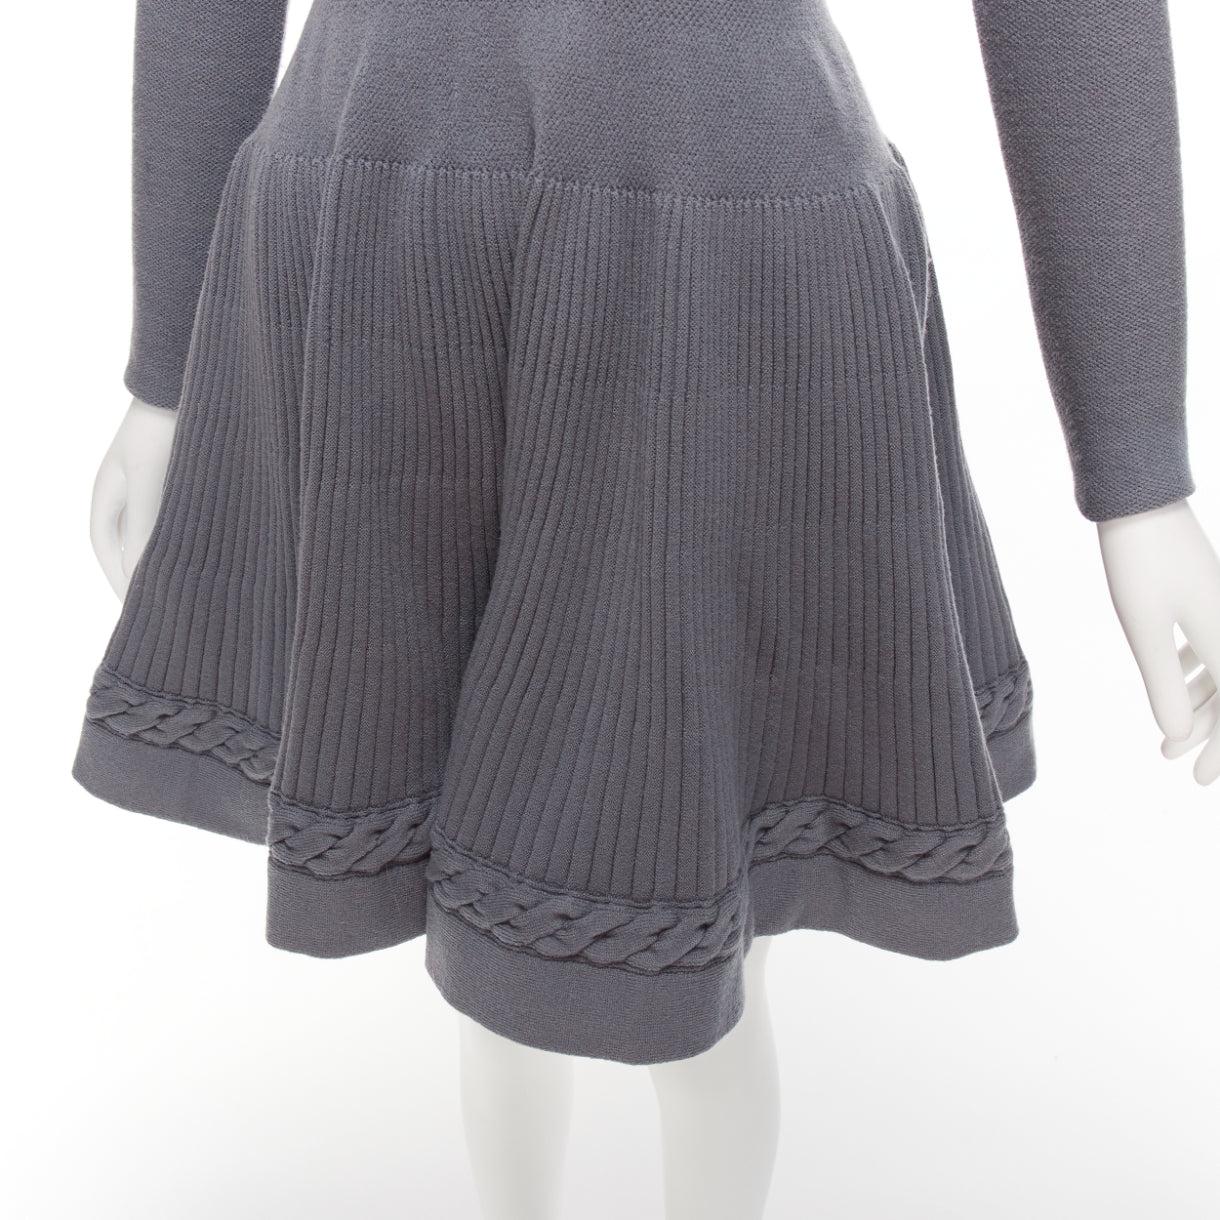 ALAIA grey virgin wool blend crew cable fit flare knitted dress FR38 XS
Reference: AAWC/A01091
Brand: Alaia
Material: Virgin Wool, Blend
Color: Grey
Pattern: Solid
Closure: Zip
Extra Details: Back zip.
Made in: Italy

CONDITION:
Condition: Very